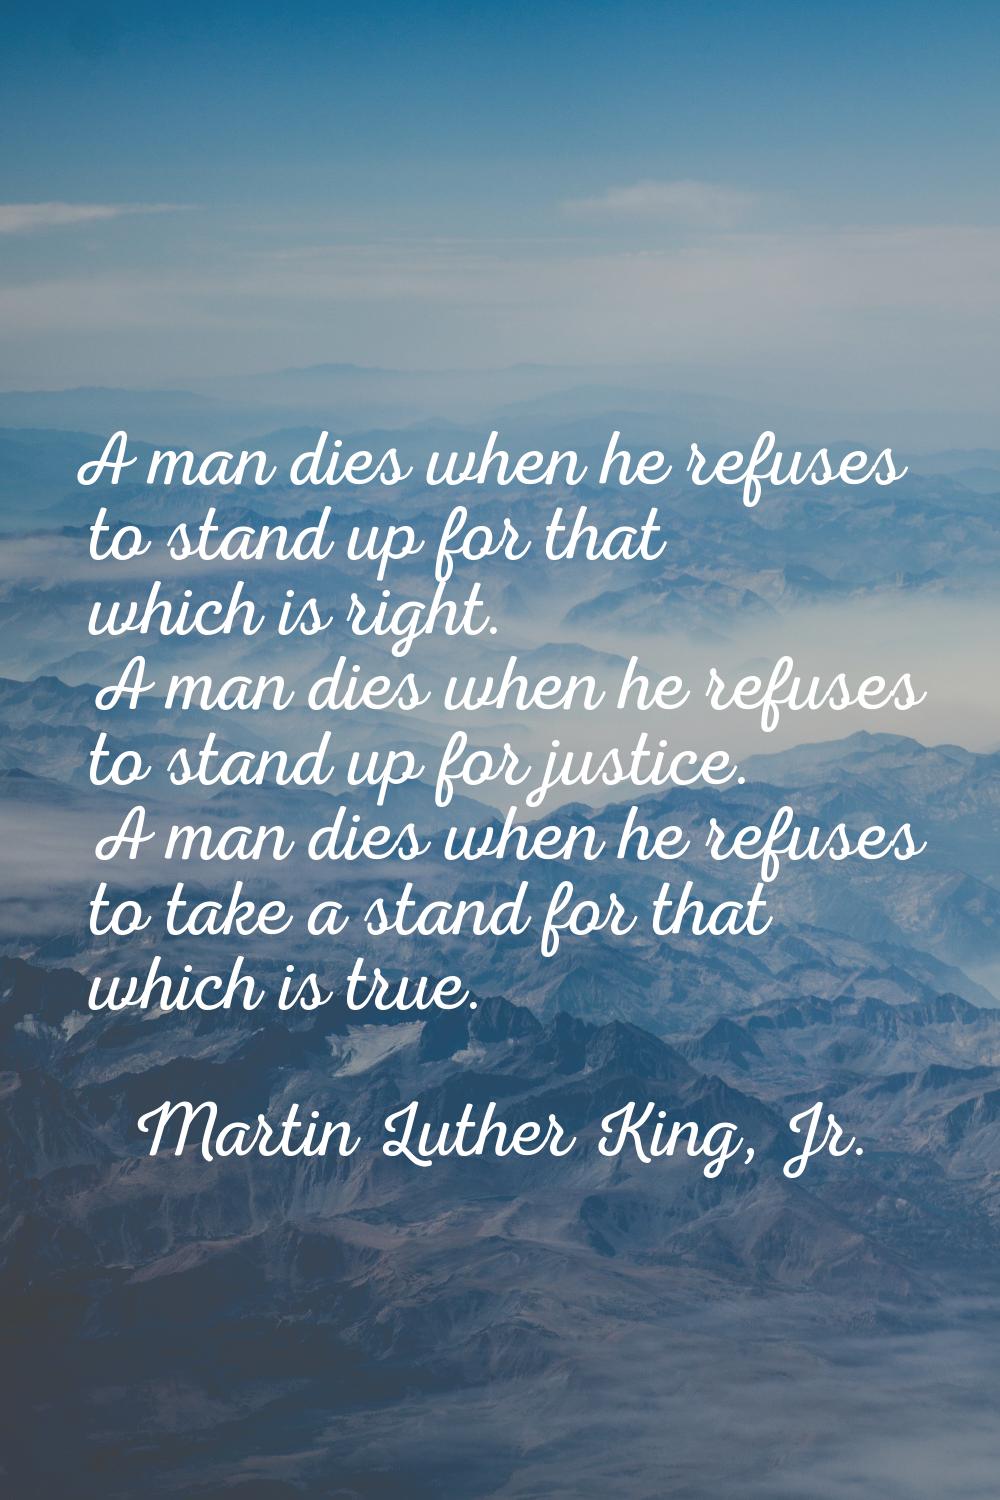 A man dies when he refuses to stand up for that which is right. A man dies when he refuses to stand